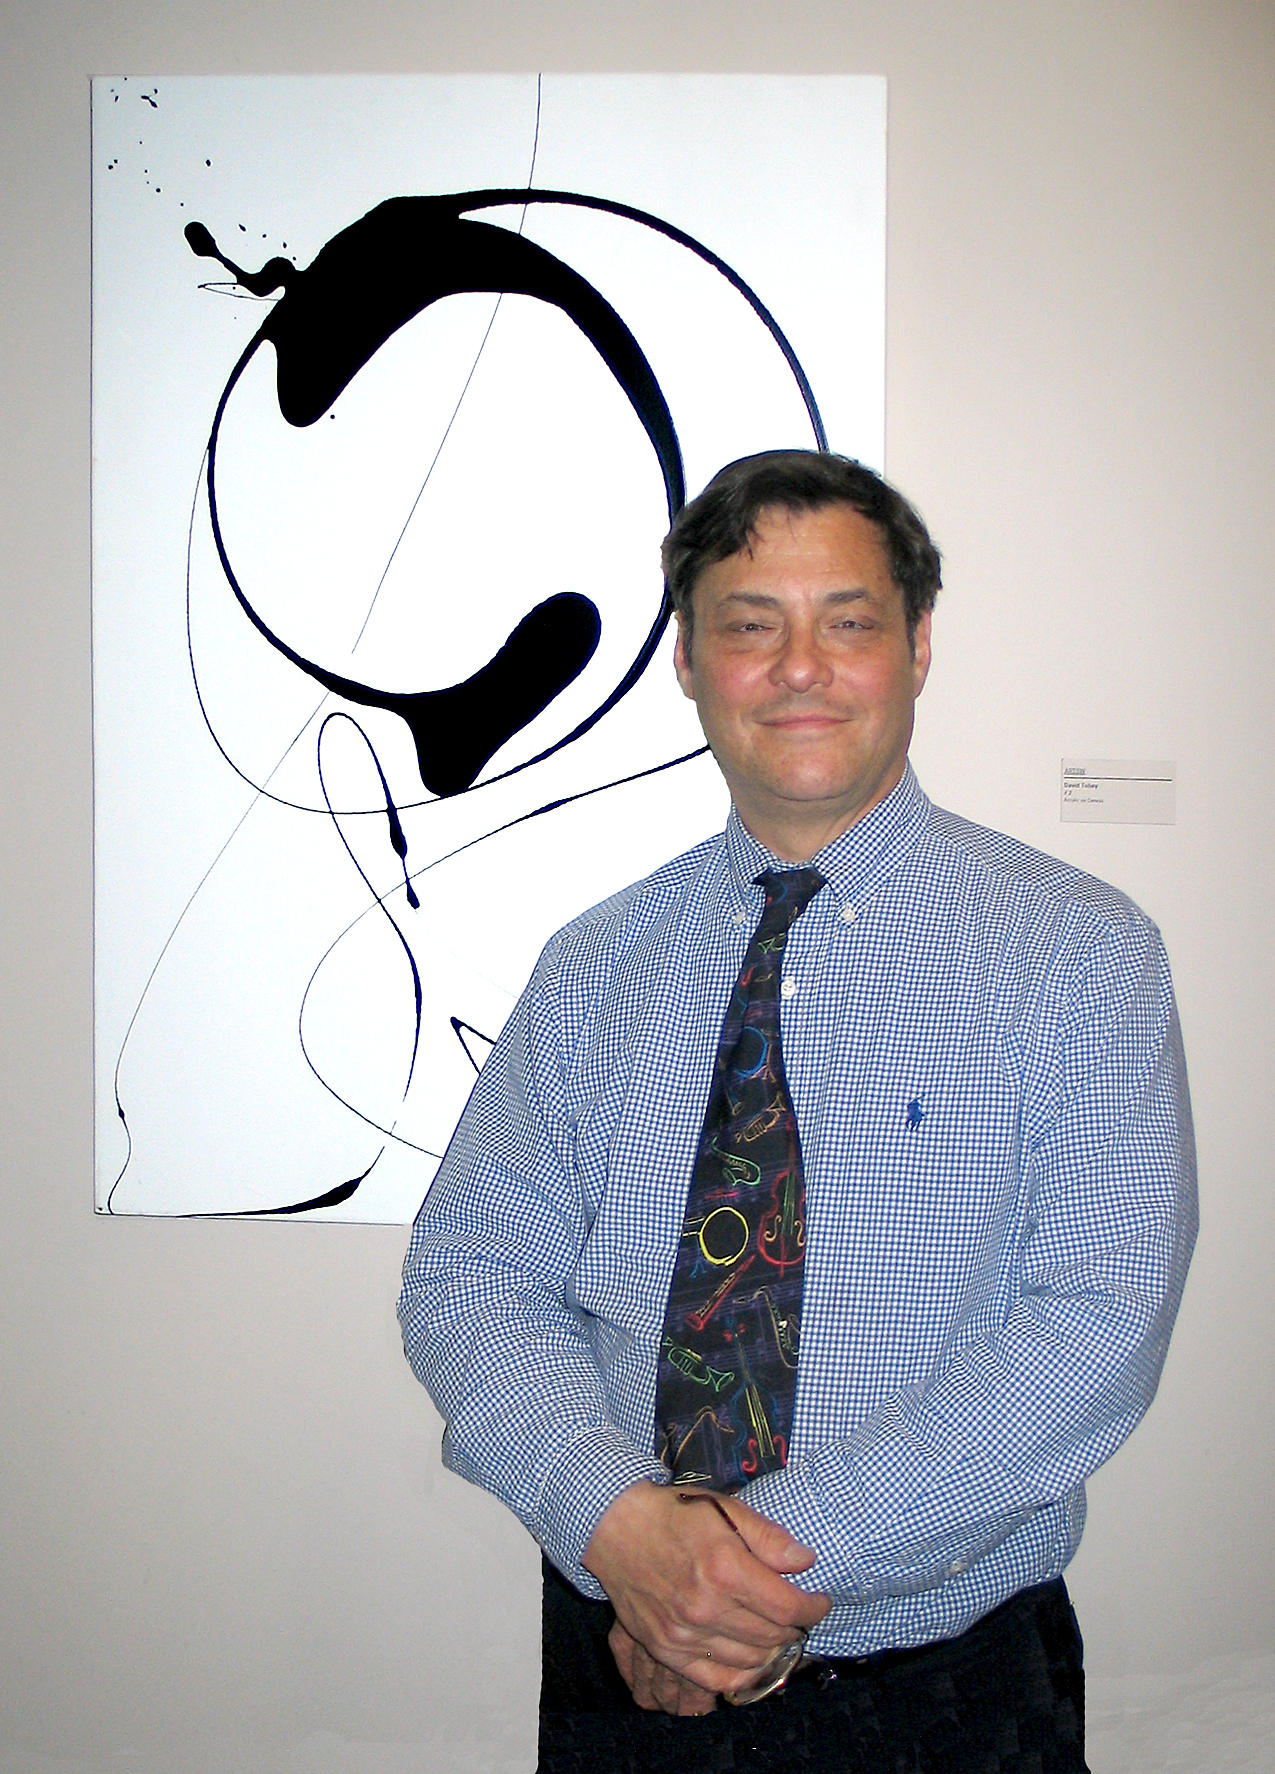 David Tobey with one of his first early monochromatic Abstract Imaginaries   "Jump Rope" in his 2012 Pleiades Gallery solo show that later expanded with more colors interacting with each other.